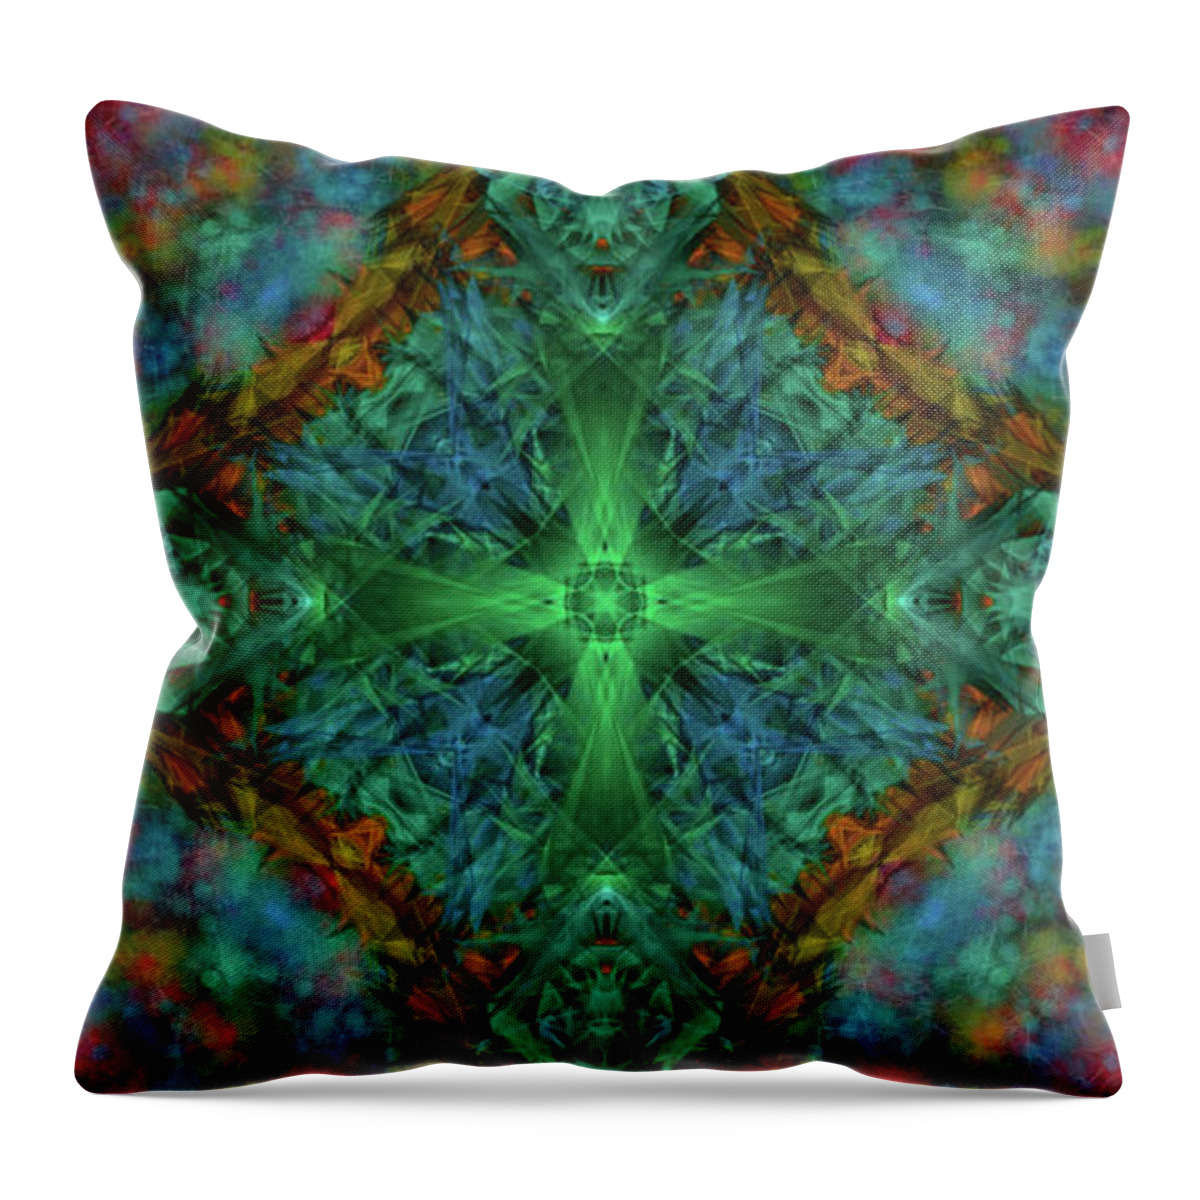 The Kosmic Kreation Universe Mandala Is A Powerful Visualization Tool That Helps You To Create A Powerful And Beautiful Representation Of The Universe. It's A Way To Tap Into The Deeper Wisdom Of The Universe And Manifest Your Dreams Into Reality. The Mandala Combines Symbols And Shapes To Represent The Interconnectedness Of All Things Throw Pillow featuring the digital art Kosmic Kreation Universe by Michael Canteen